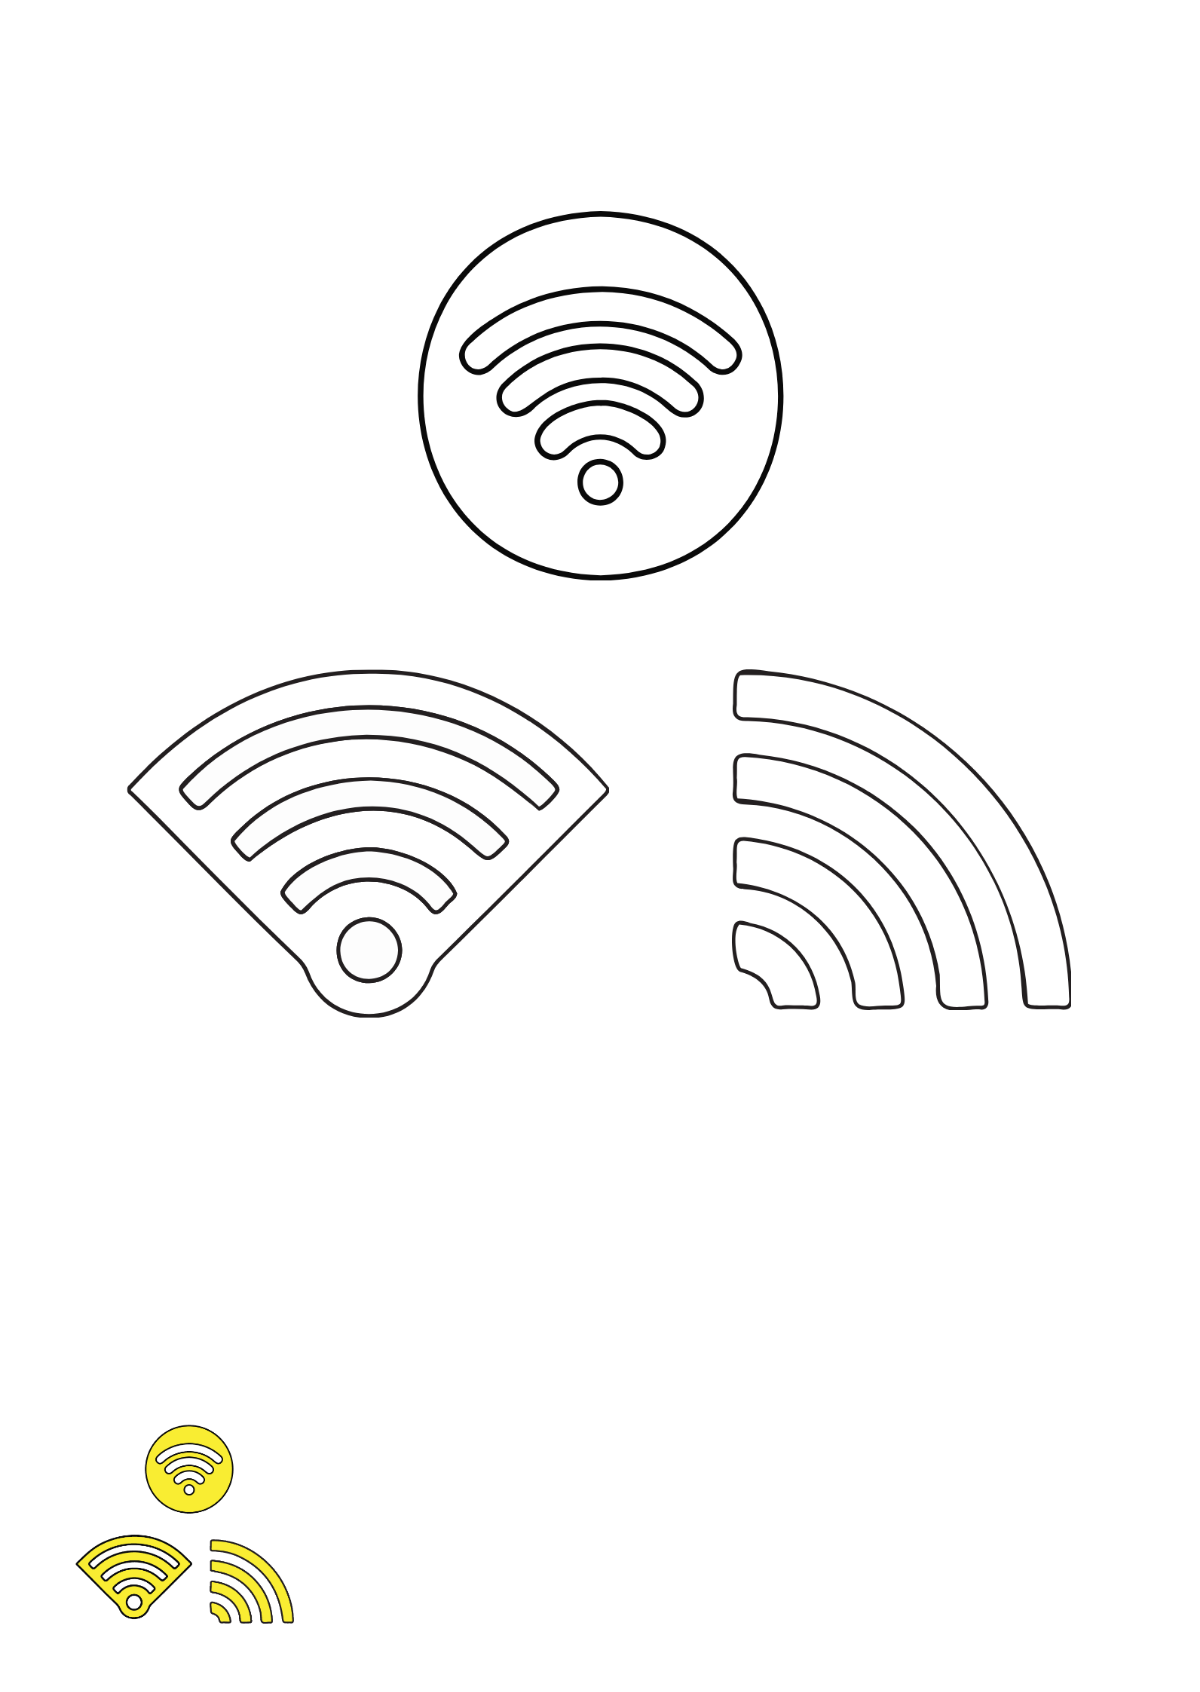 Yellow Wifi coloring page Template